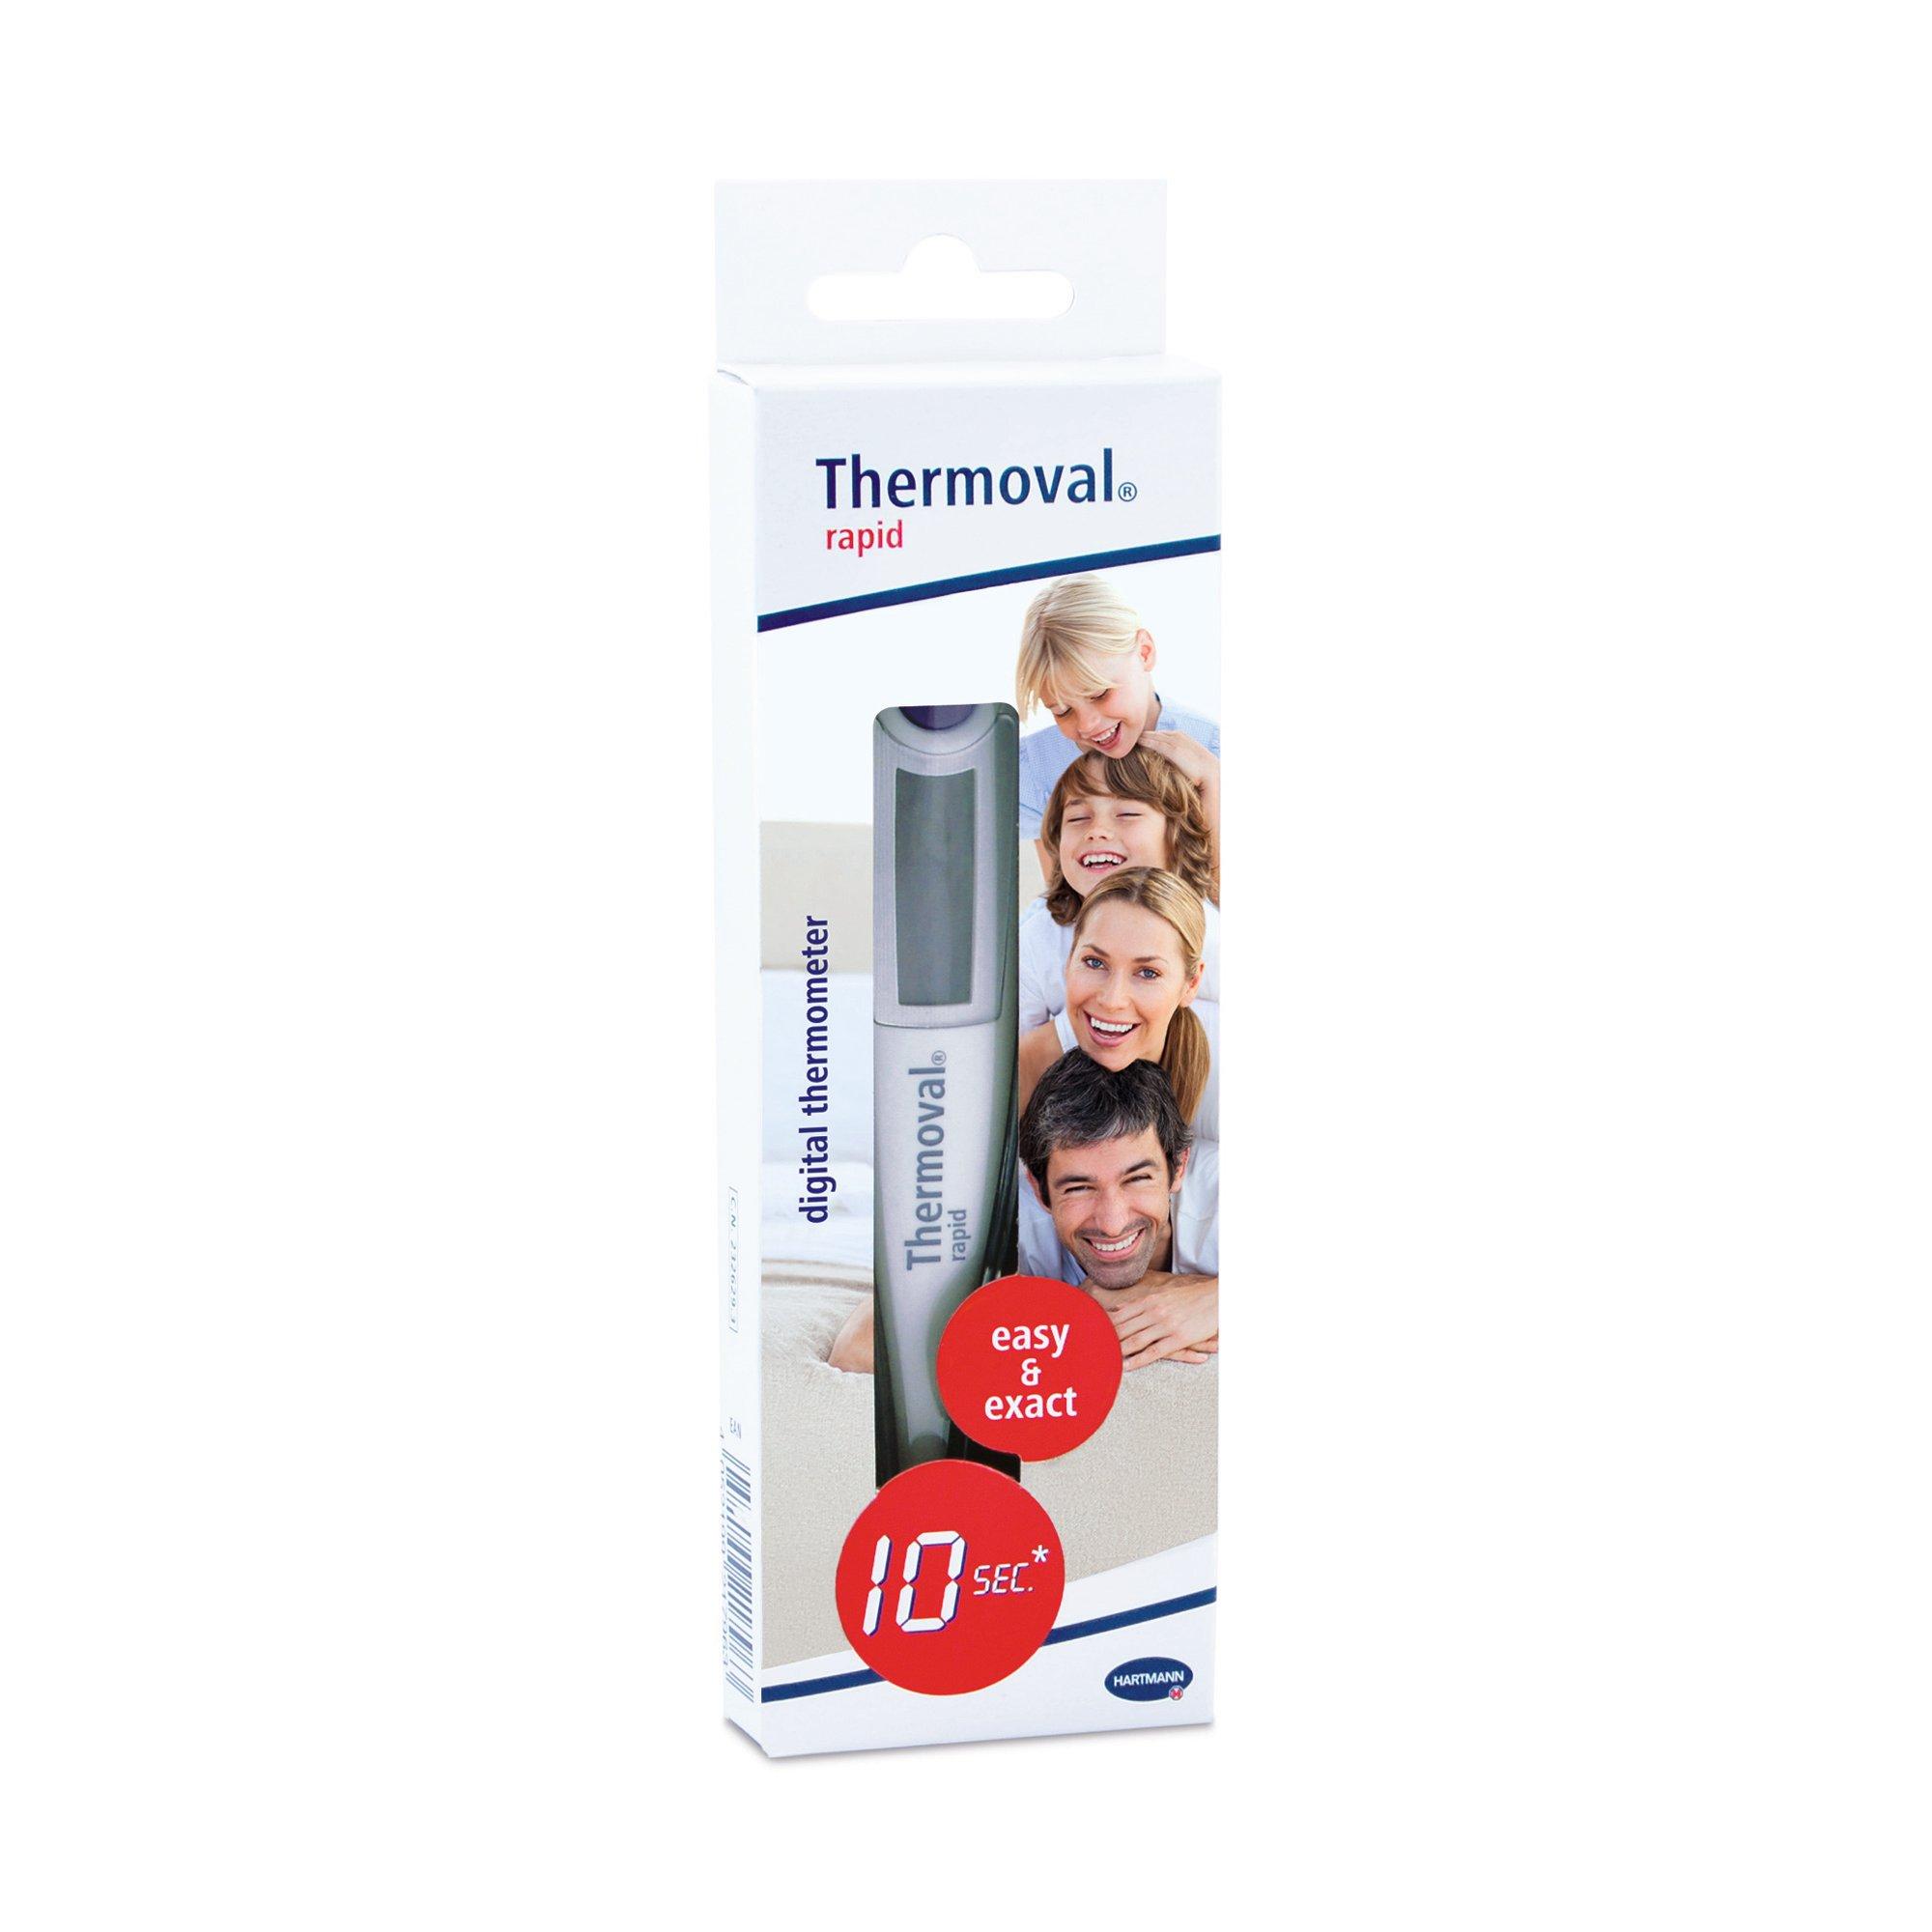 Thermoval  Fieberthermometer rapid 10 sec 